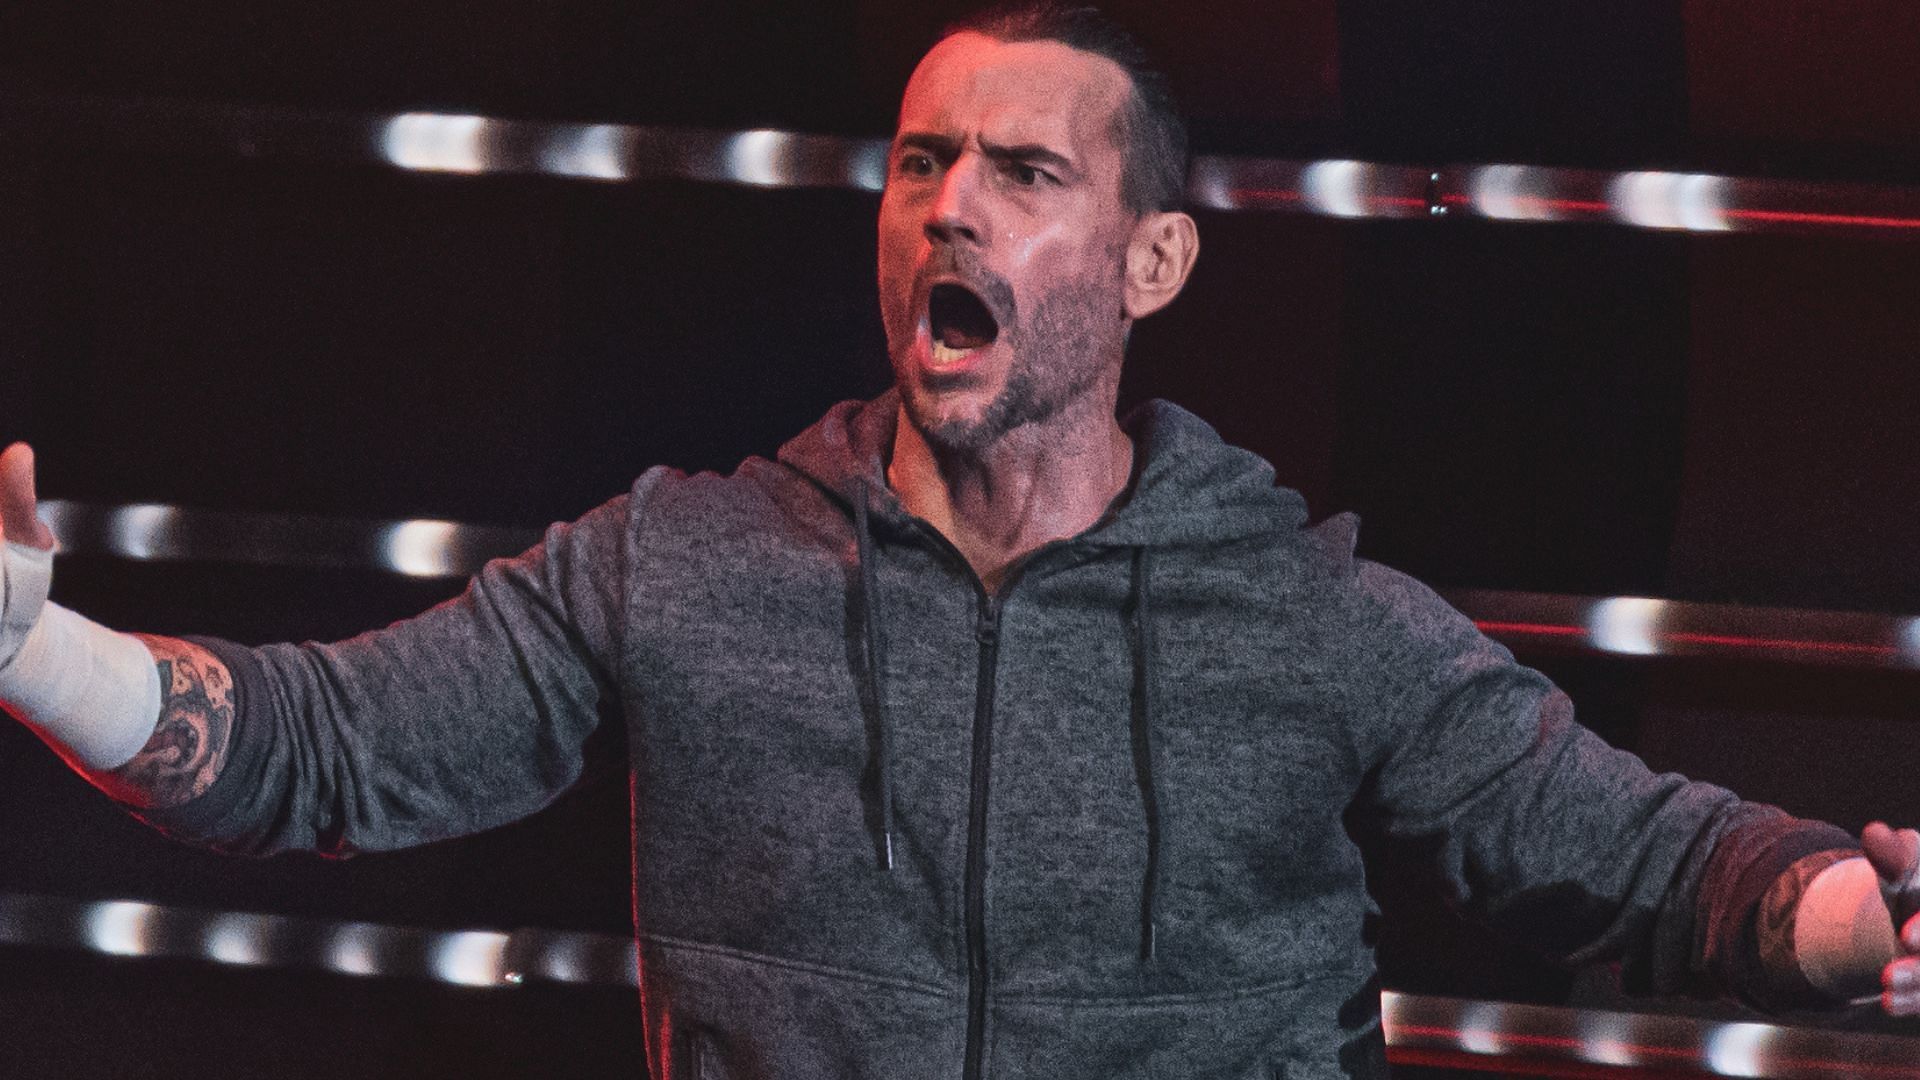 CM Punk at an AEW event in 2022 (credit: Jay Lee Photography)